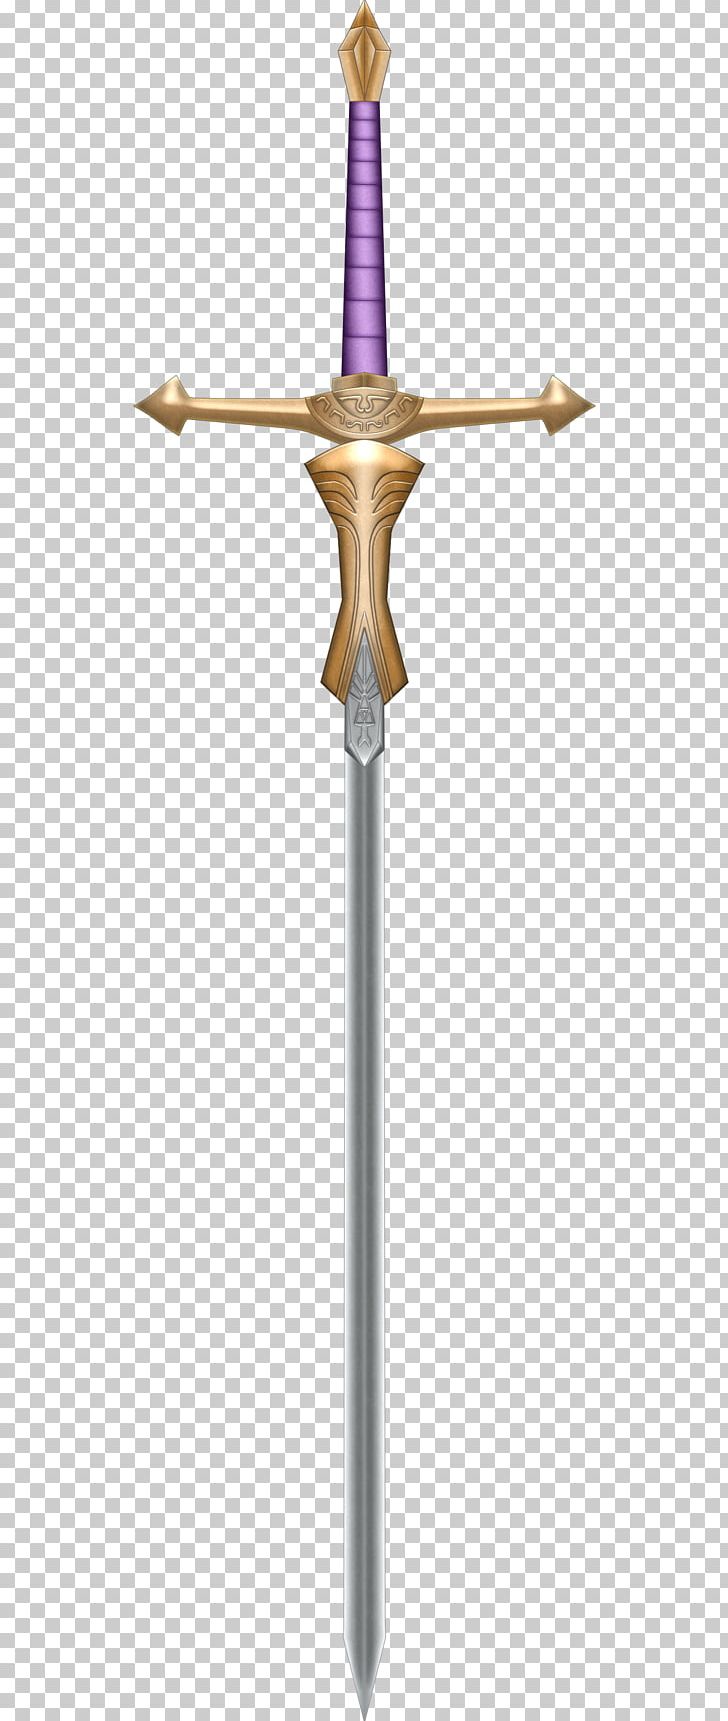 The Legend Of Zelda: Twilight Princess HD The Legend Of Zelda: Skyward Sword Princess Zelda Link PNG, Clipart, Cold Weapon, Cross, Epee, Gaming, Ganon Free PNG Download